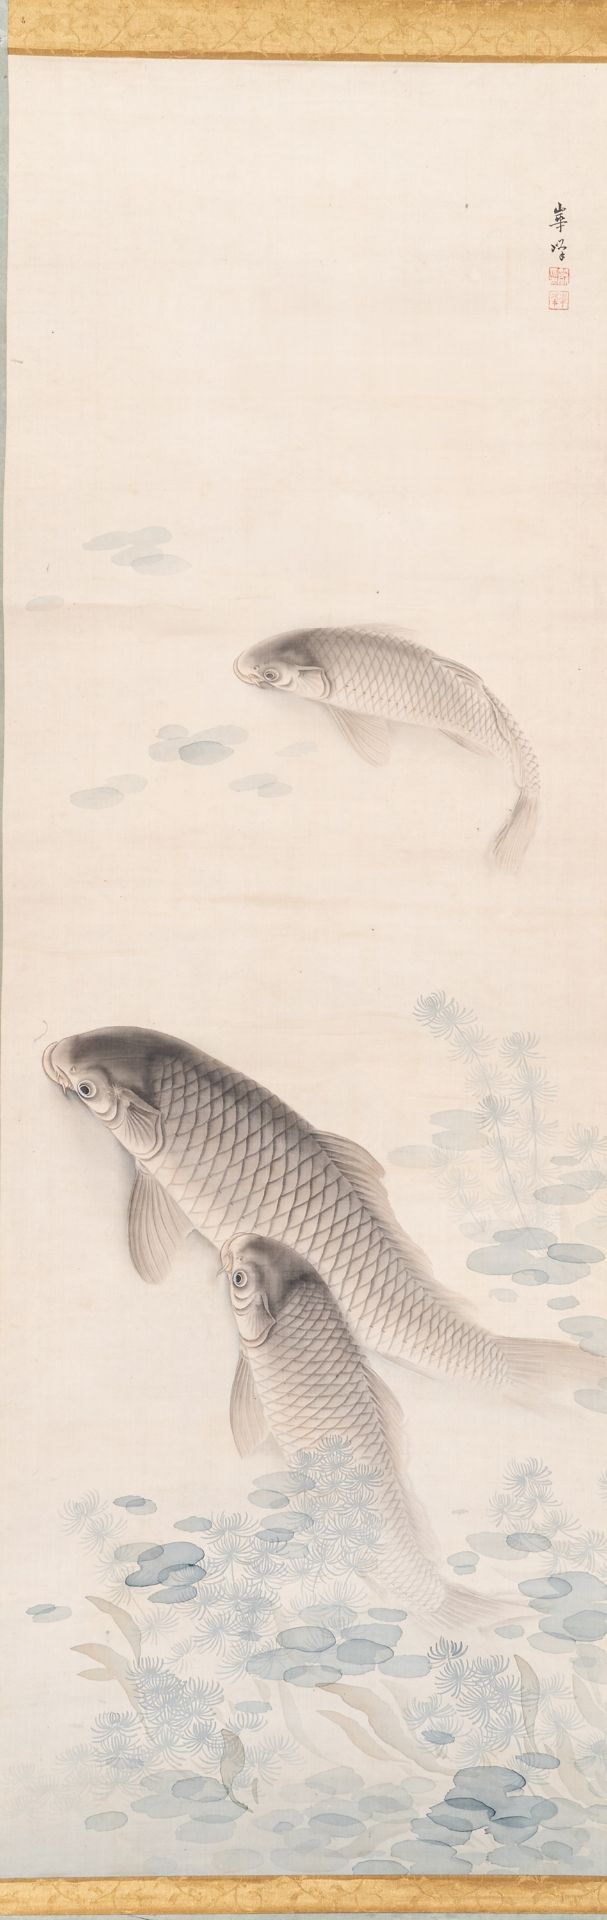 A SIGNED SCROLL PAINTING OF THREE CARPS IN A POND, MEIJI